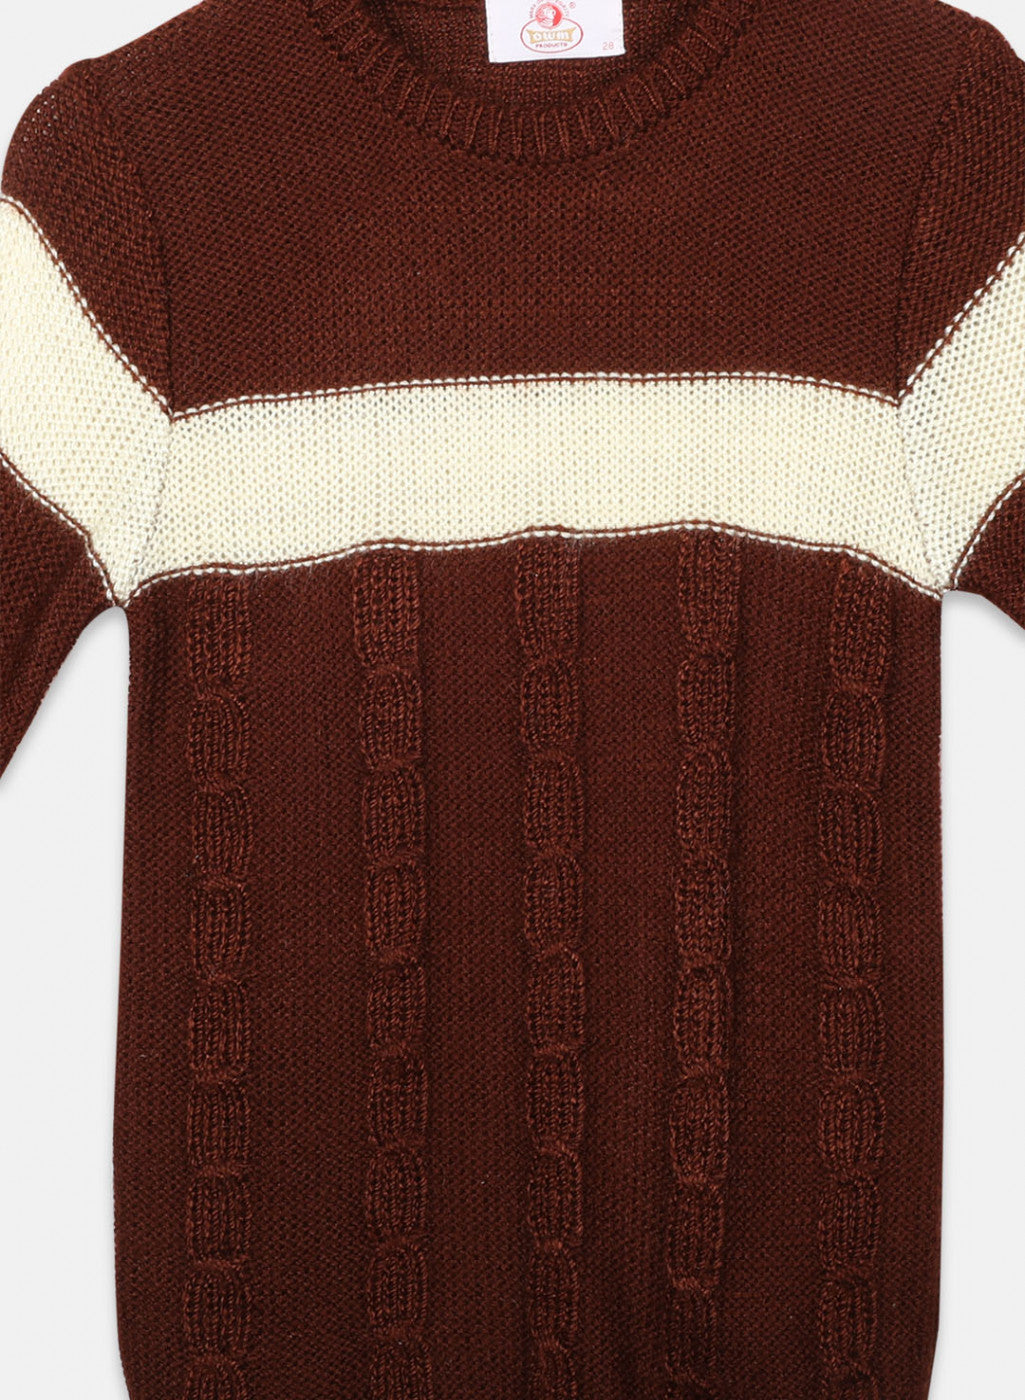 Oswal Brown Boys Pullover